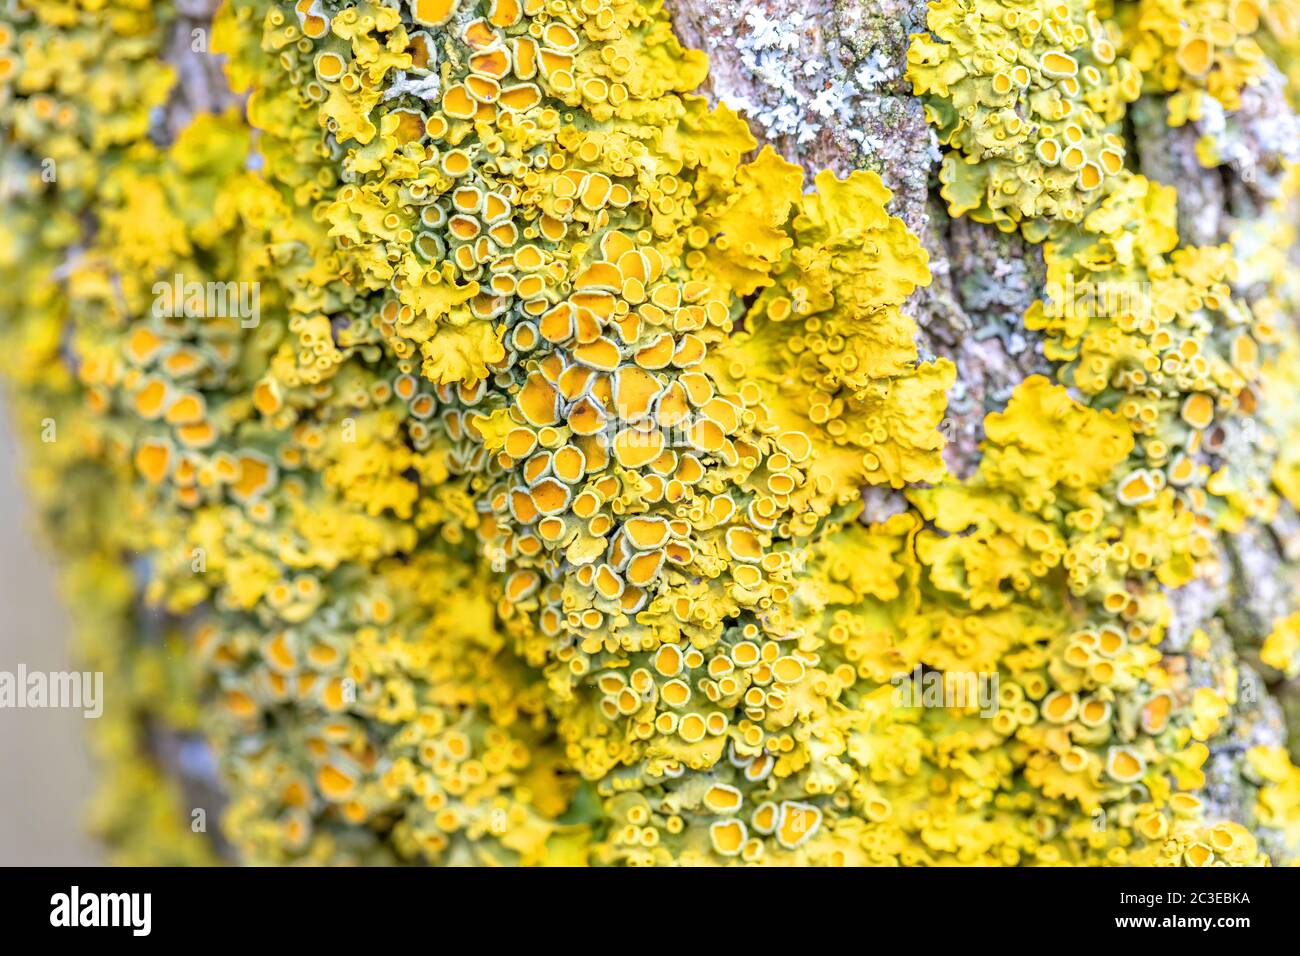 Yellow parasitic fungus on twig in winter Stock Photo